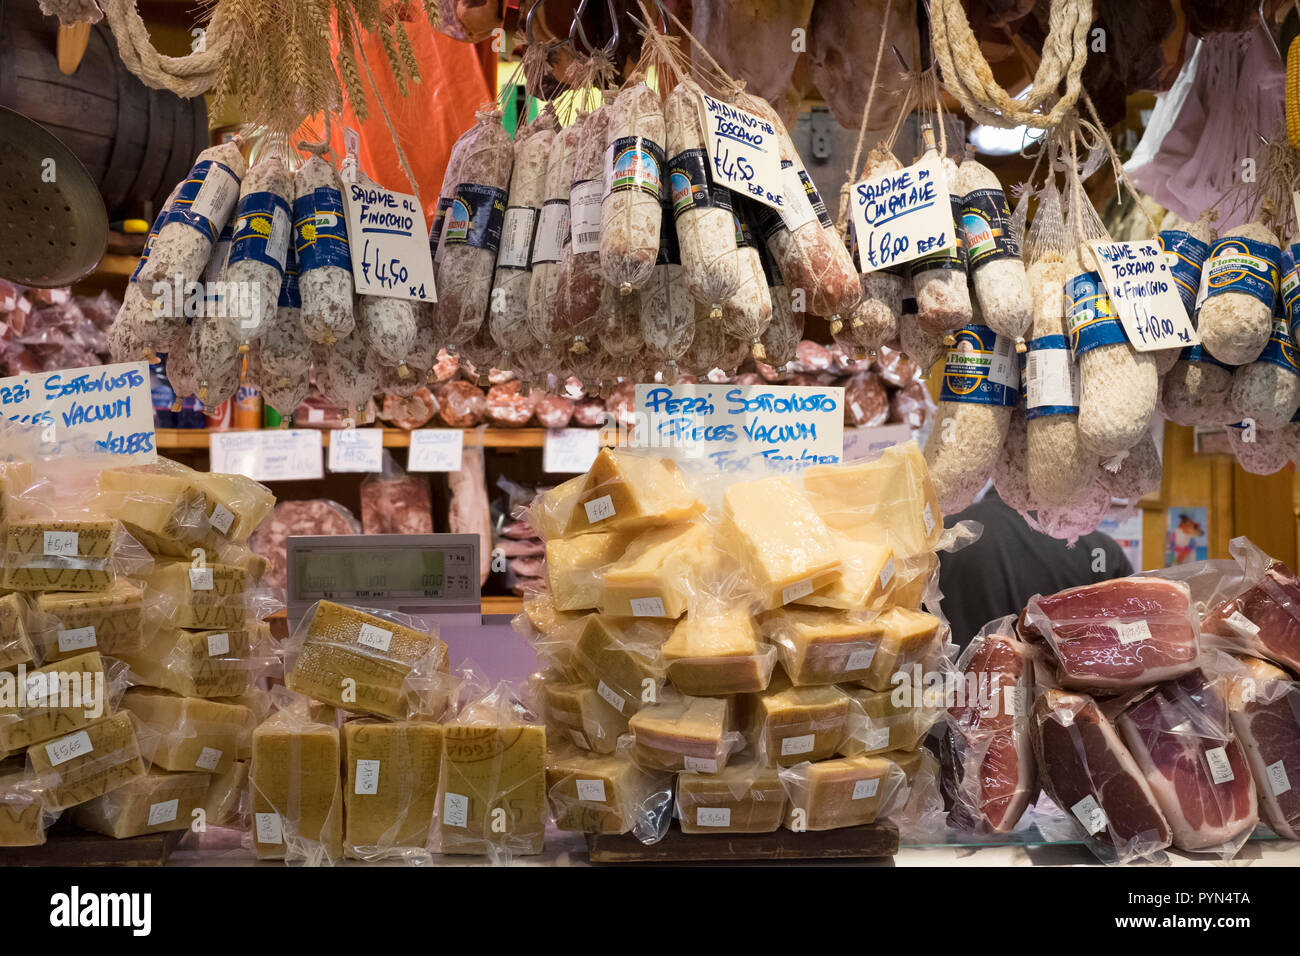 Display of Salame (Salami) cured sausages and Parmigiano reggio classico on a market stall in Florence, Italy. Stock Photo